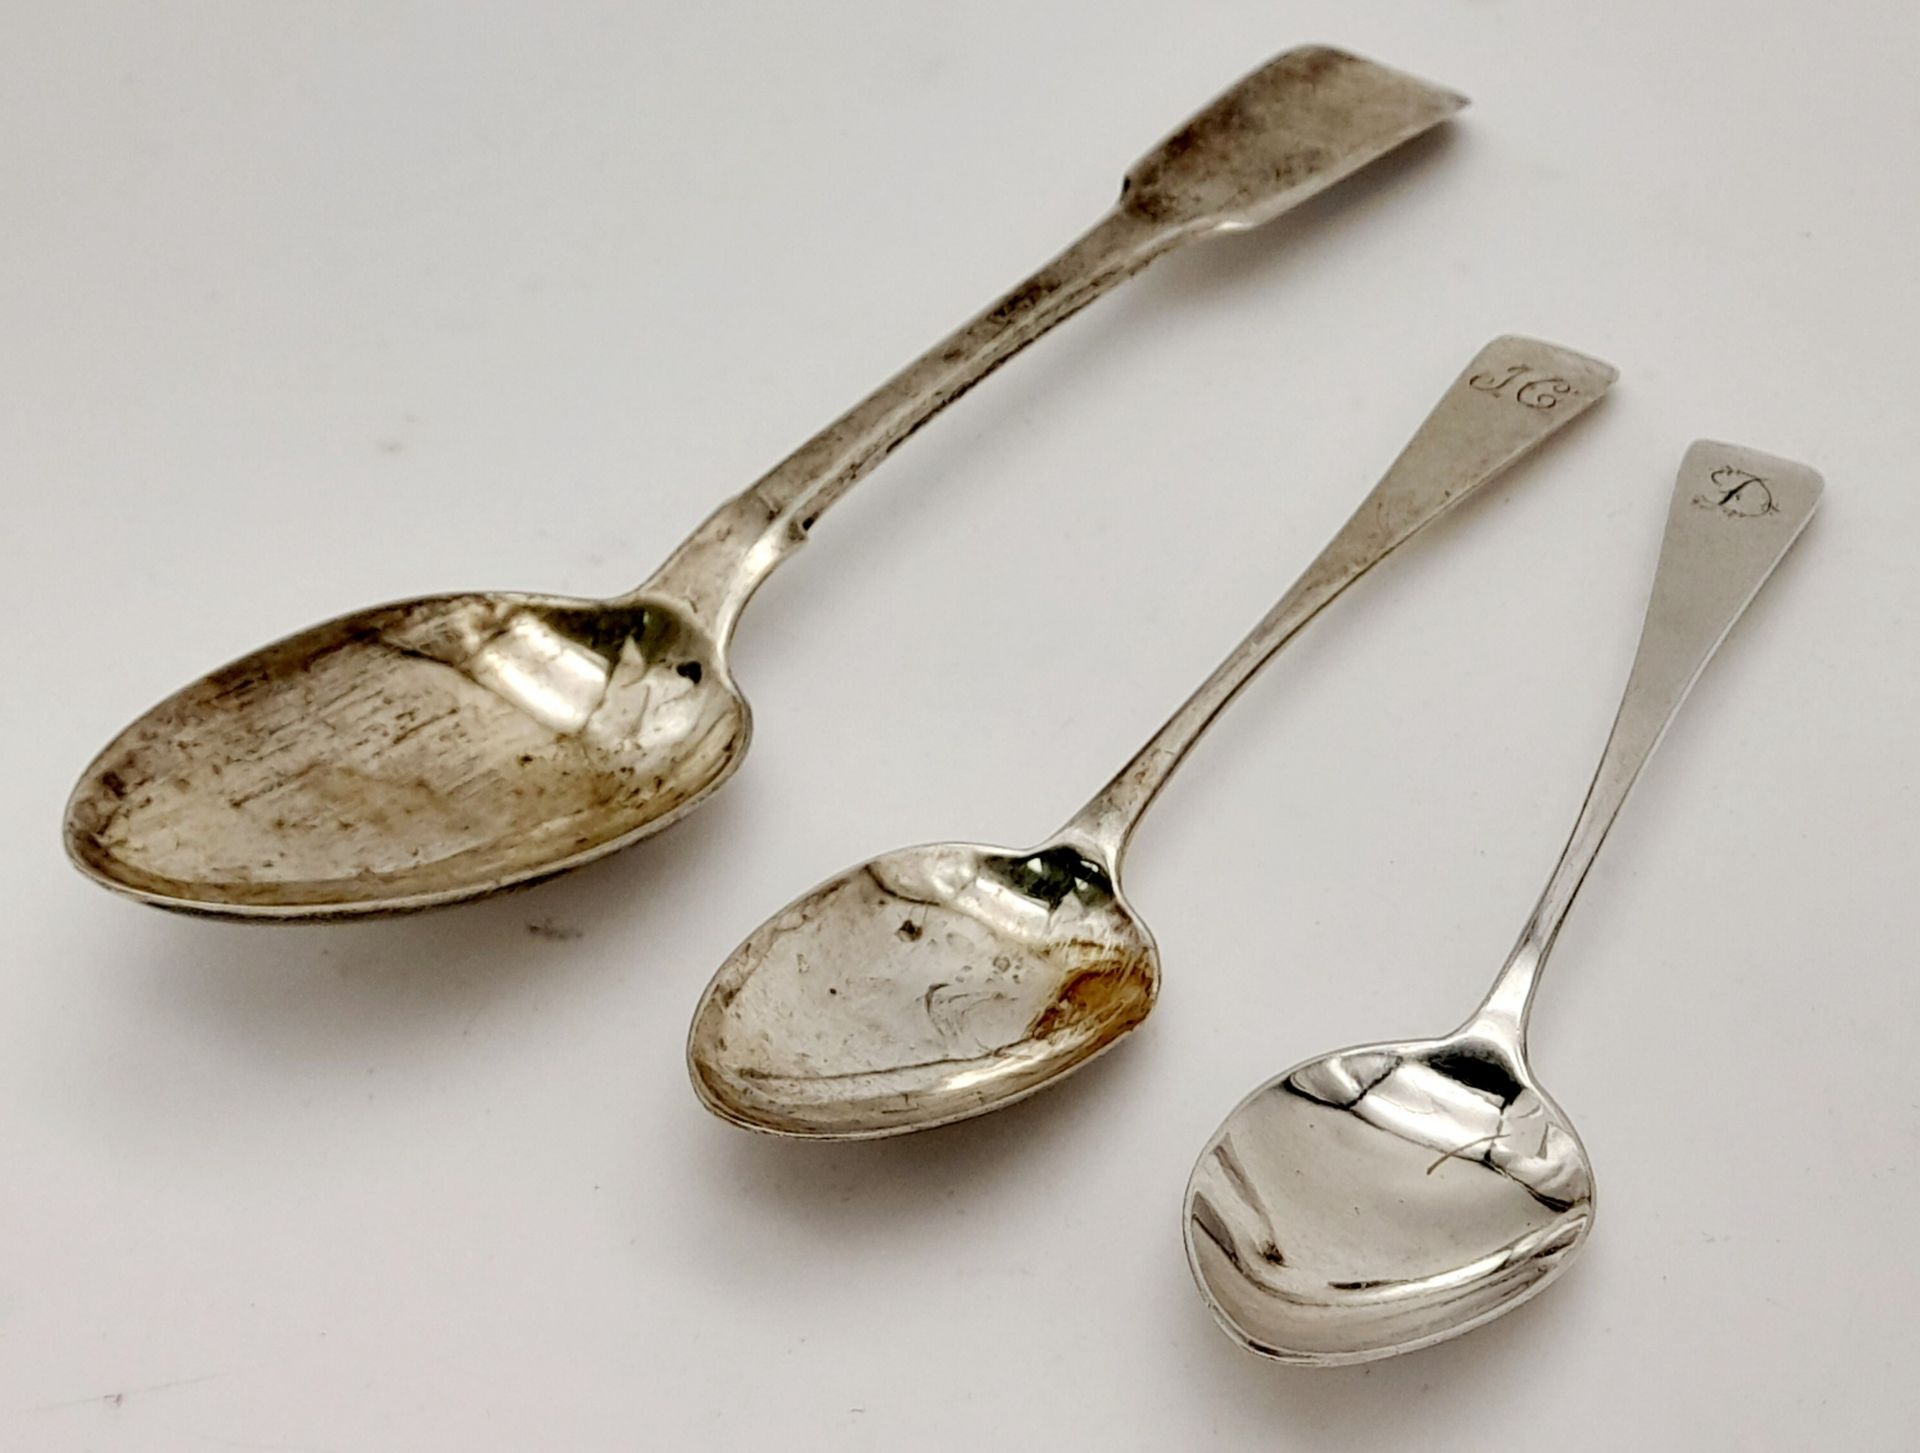 Three Pieces of Georgian Sterling Silver Flatware. Two small spoons and one serving spoon. Hallmarks